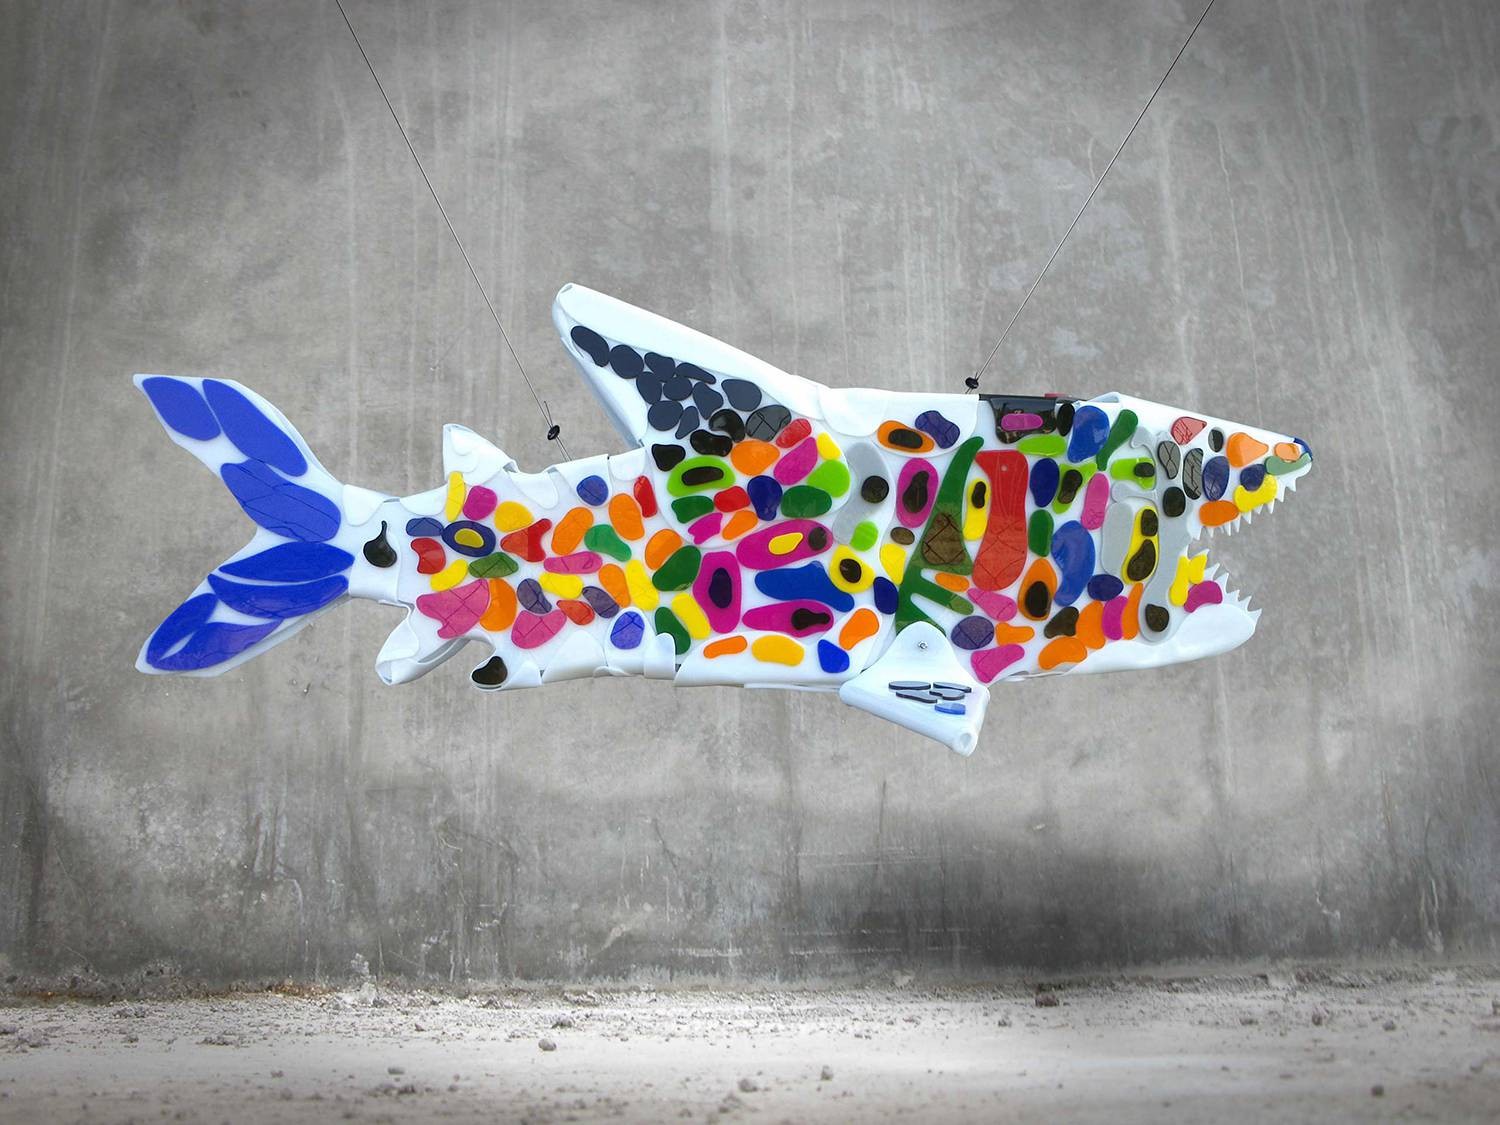 Colorized moments is a light shark sculpture on a concrete background.